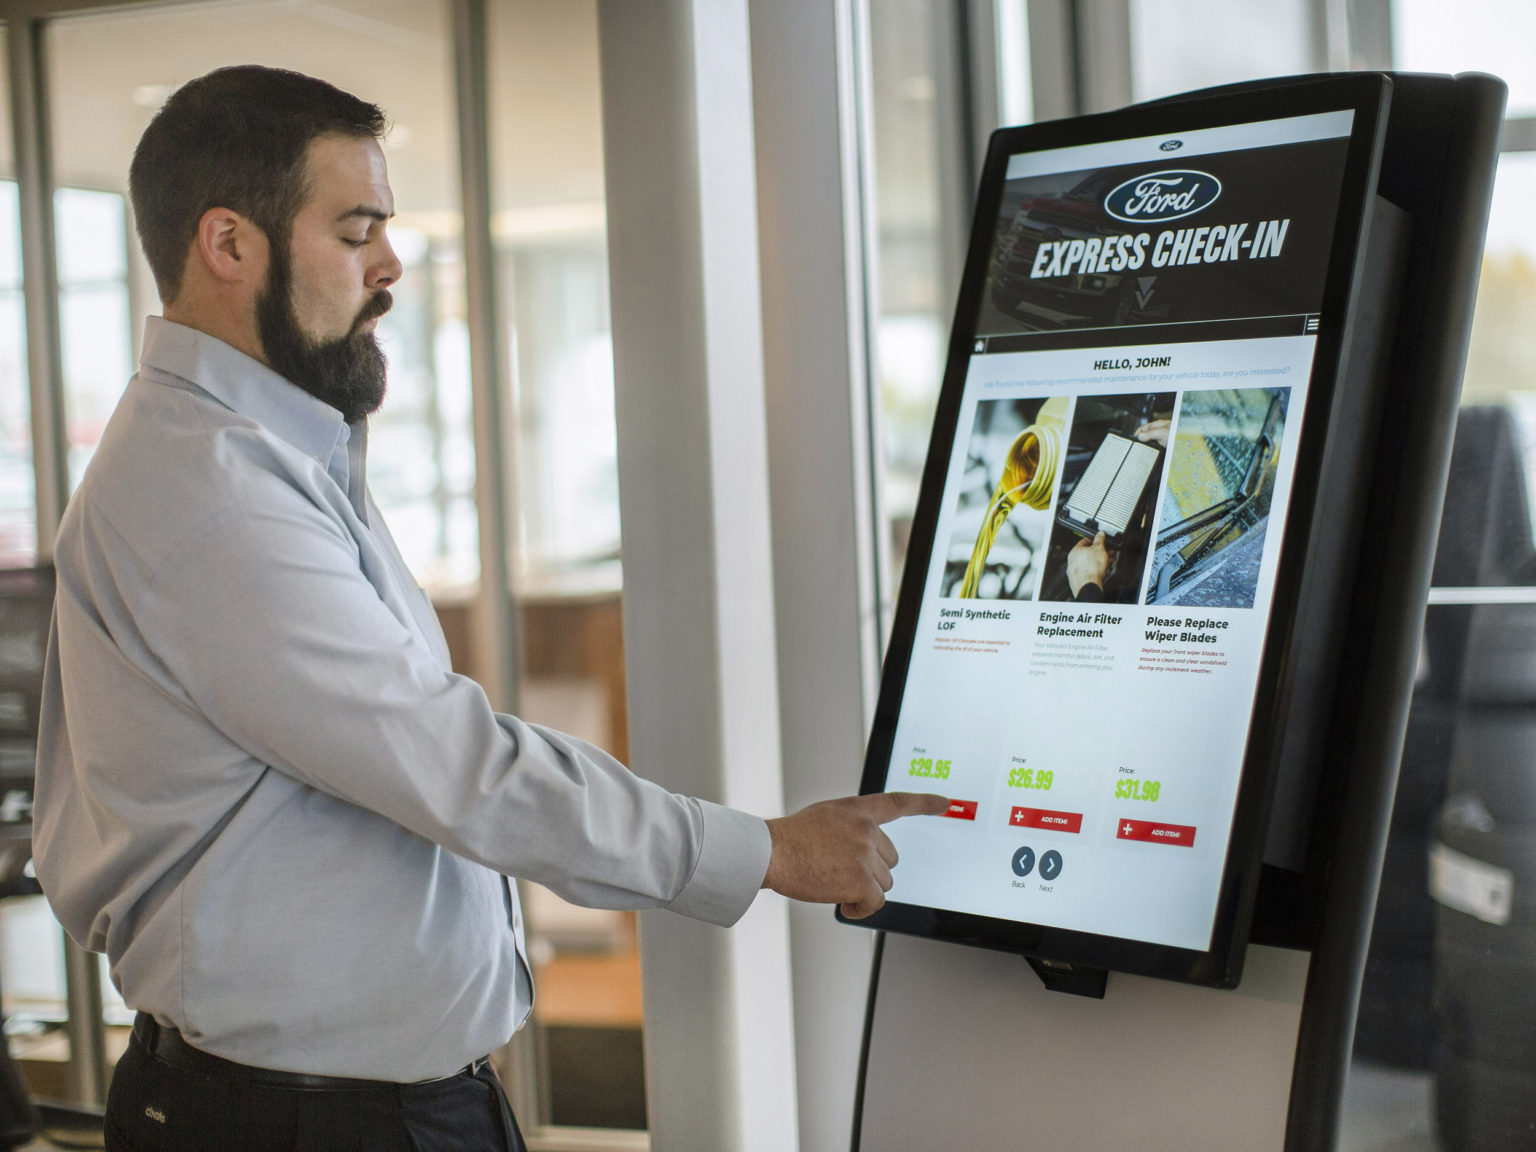 The new kiosks significantly cut down on the time spent checking in vehicles at dealerships.